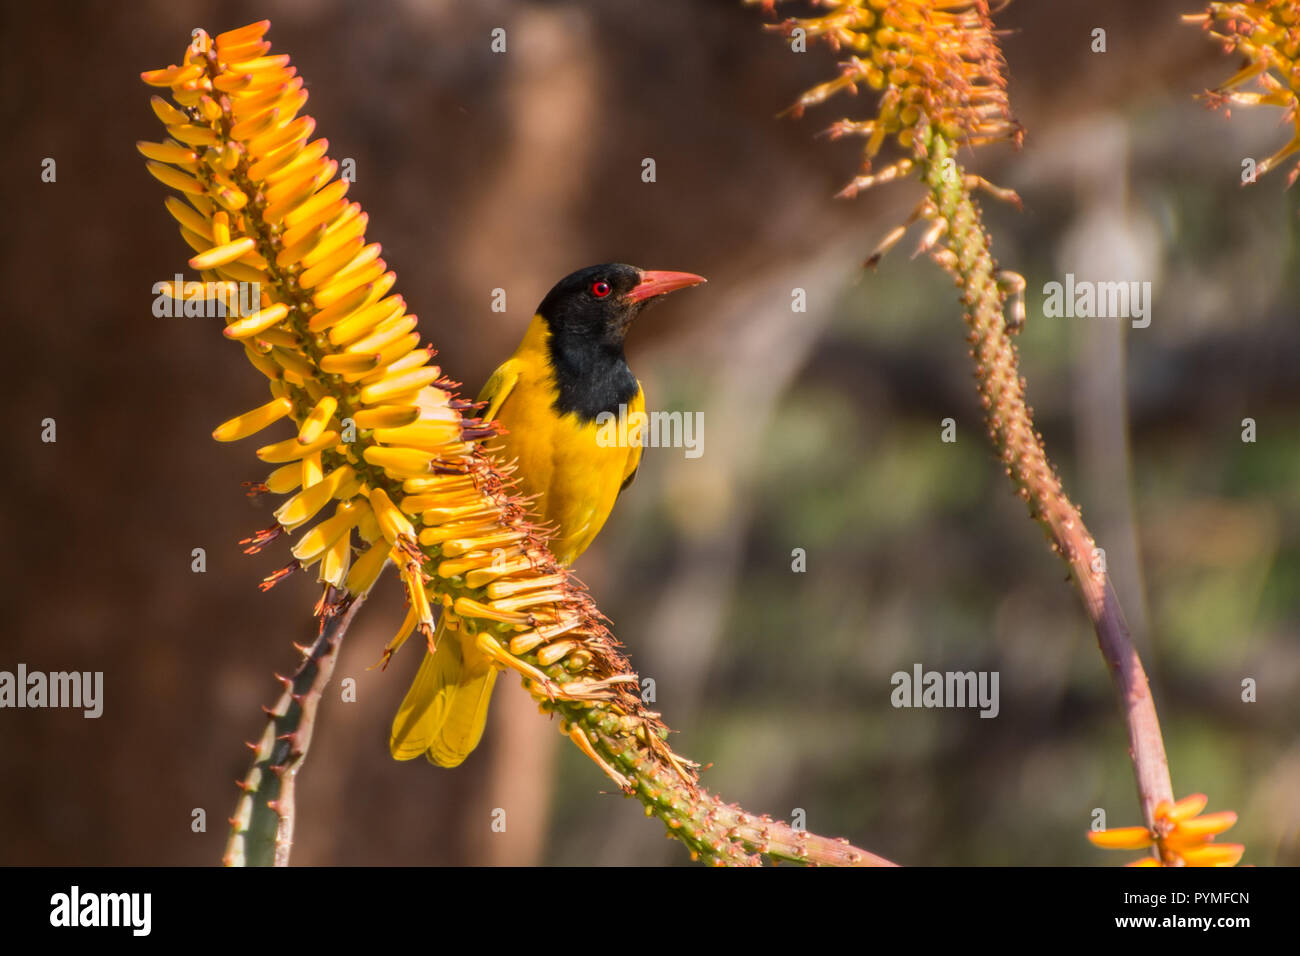 Black-Headed Oriole is a bright yellow bird with black head and red beak and eyes sitting on a yellow Aloe plant flower, looking at the camera close u Stock Photo